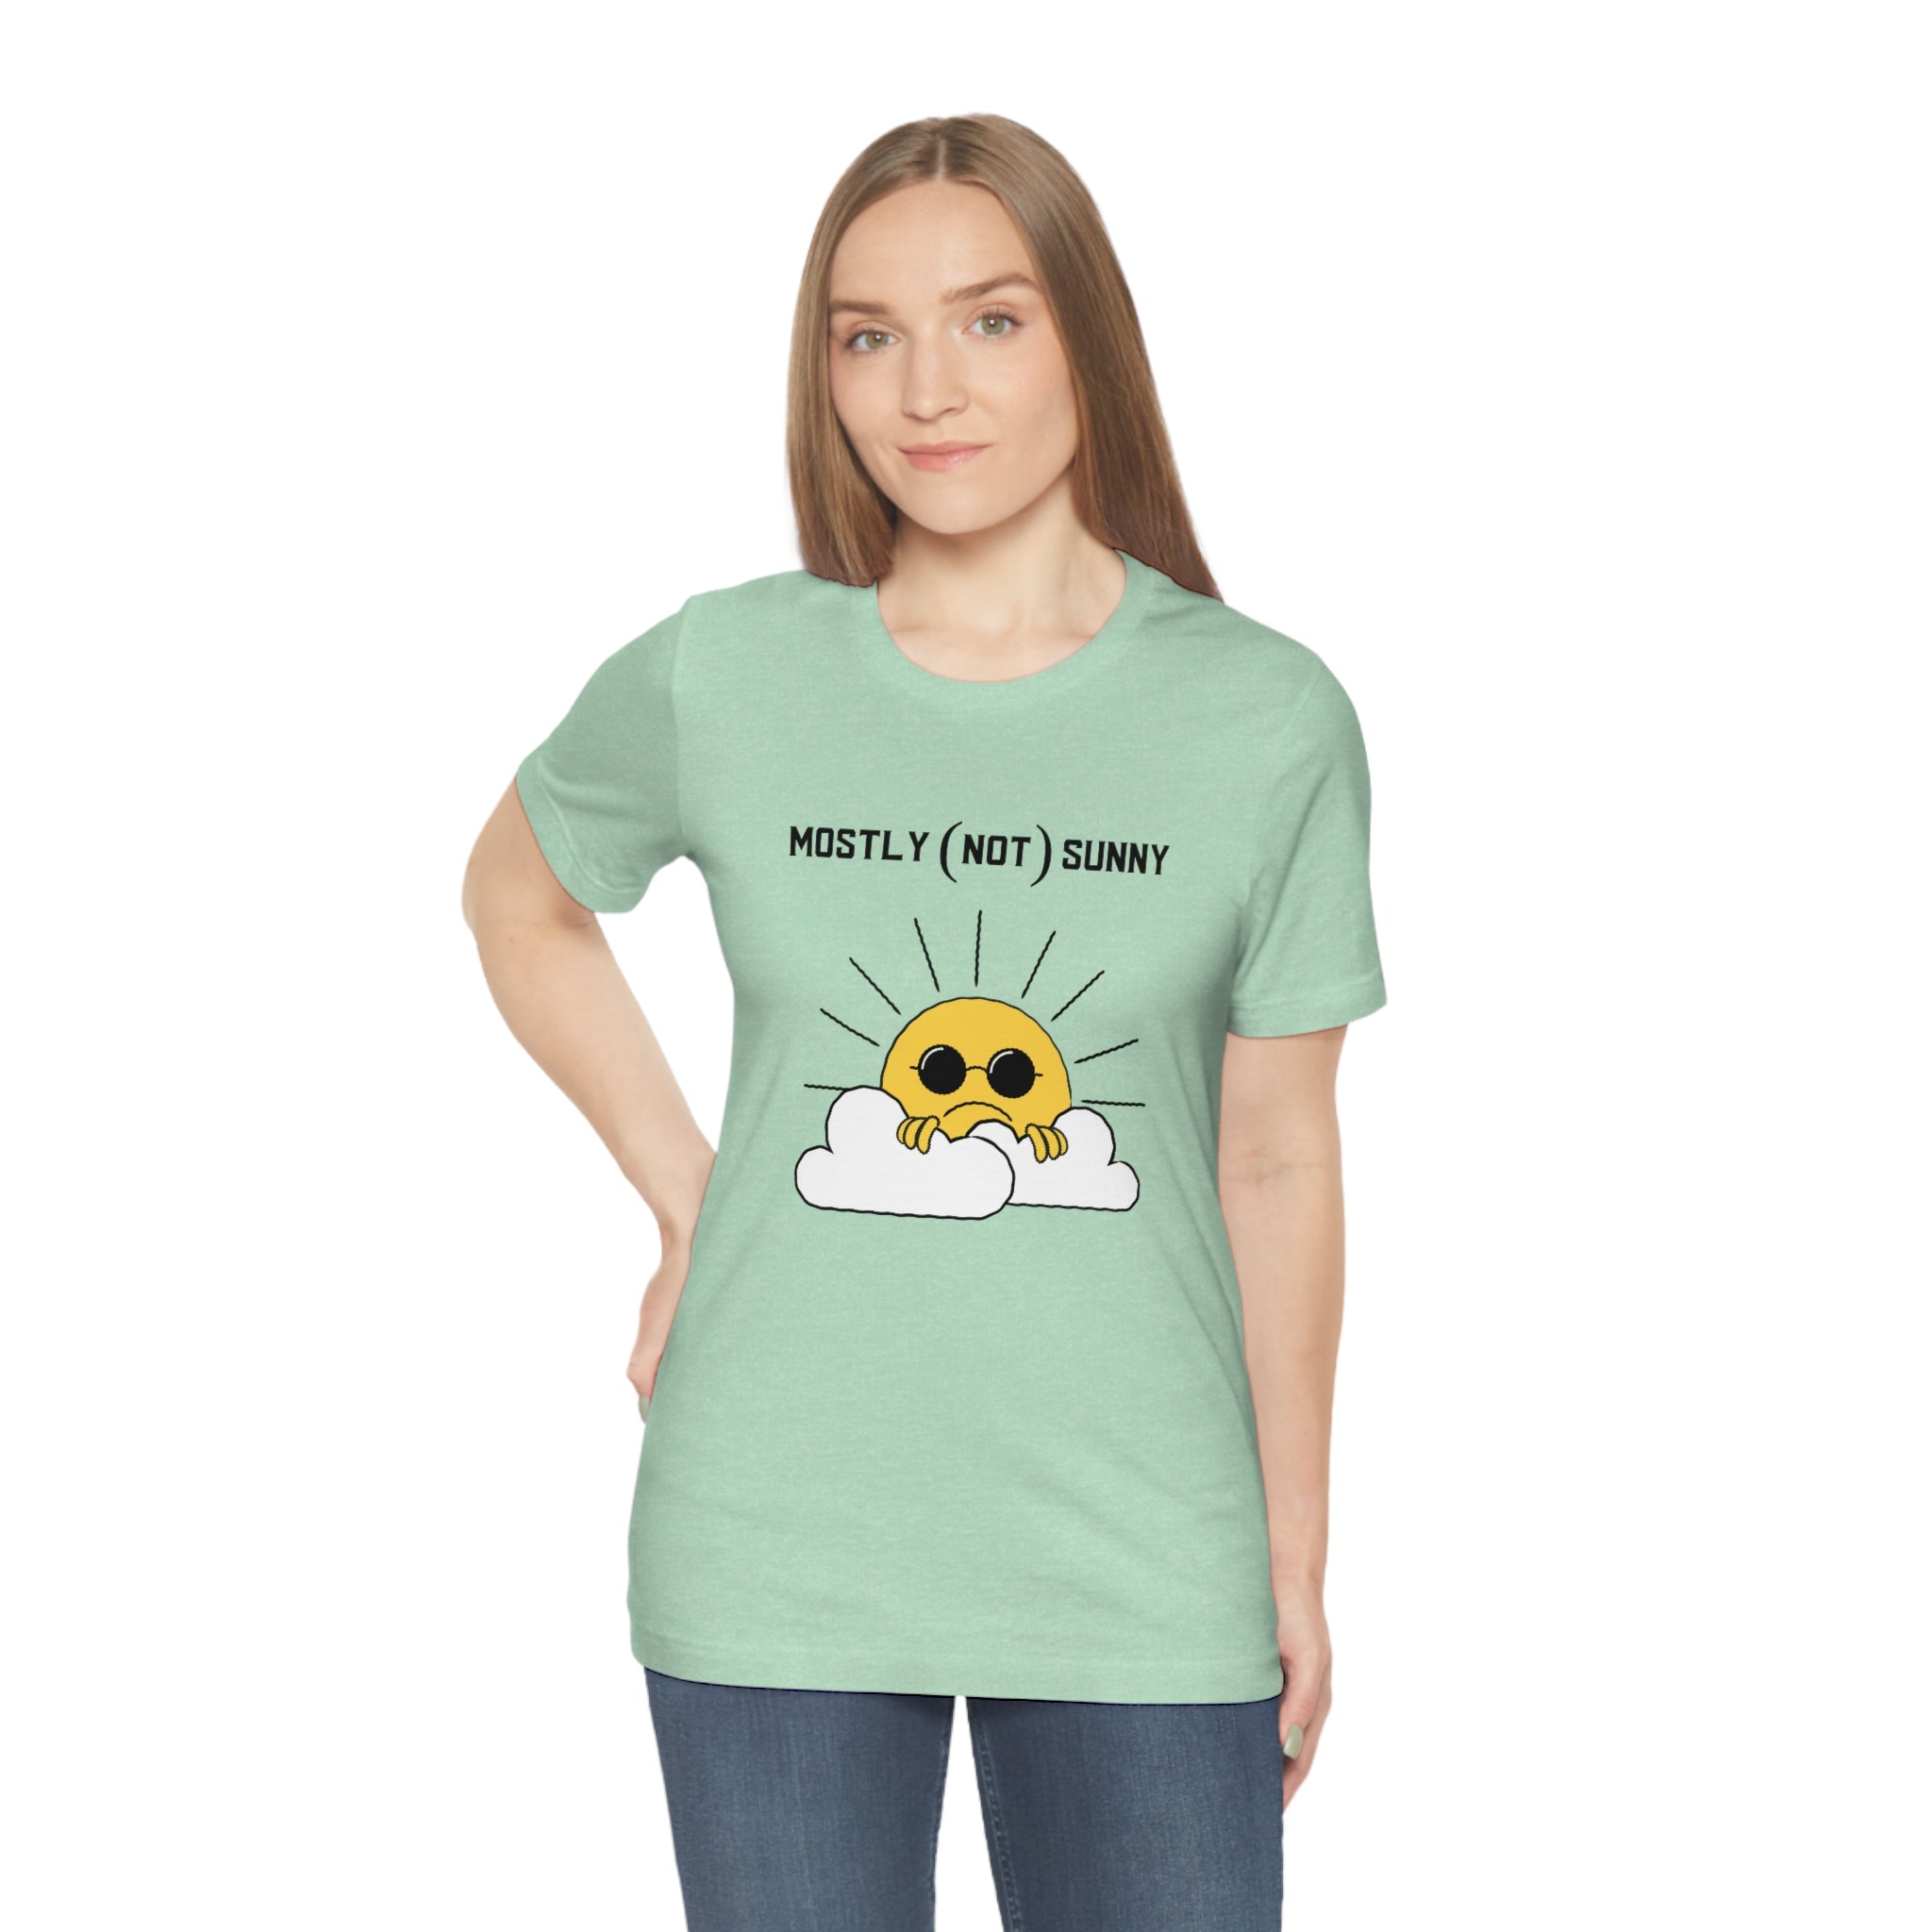 Mostly (Not) Sunny Tee 